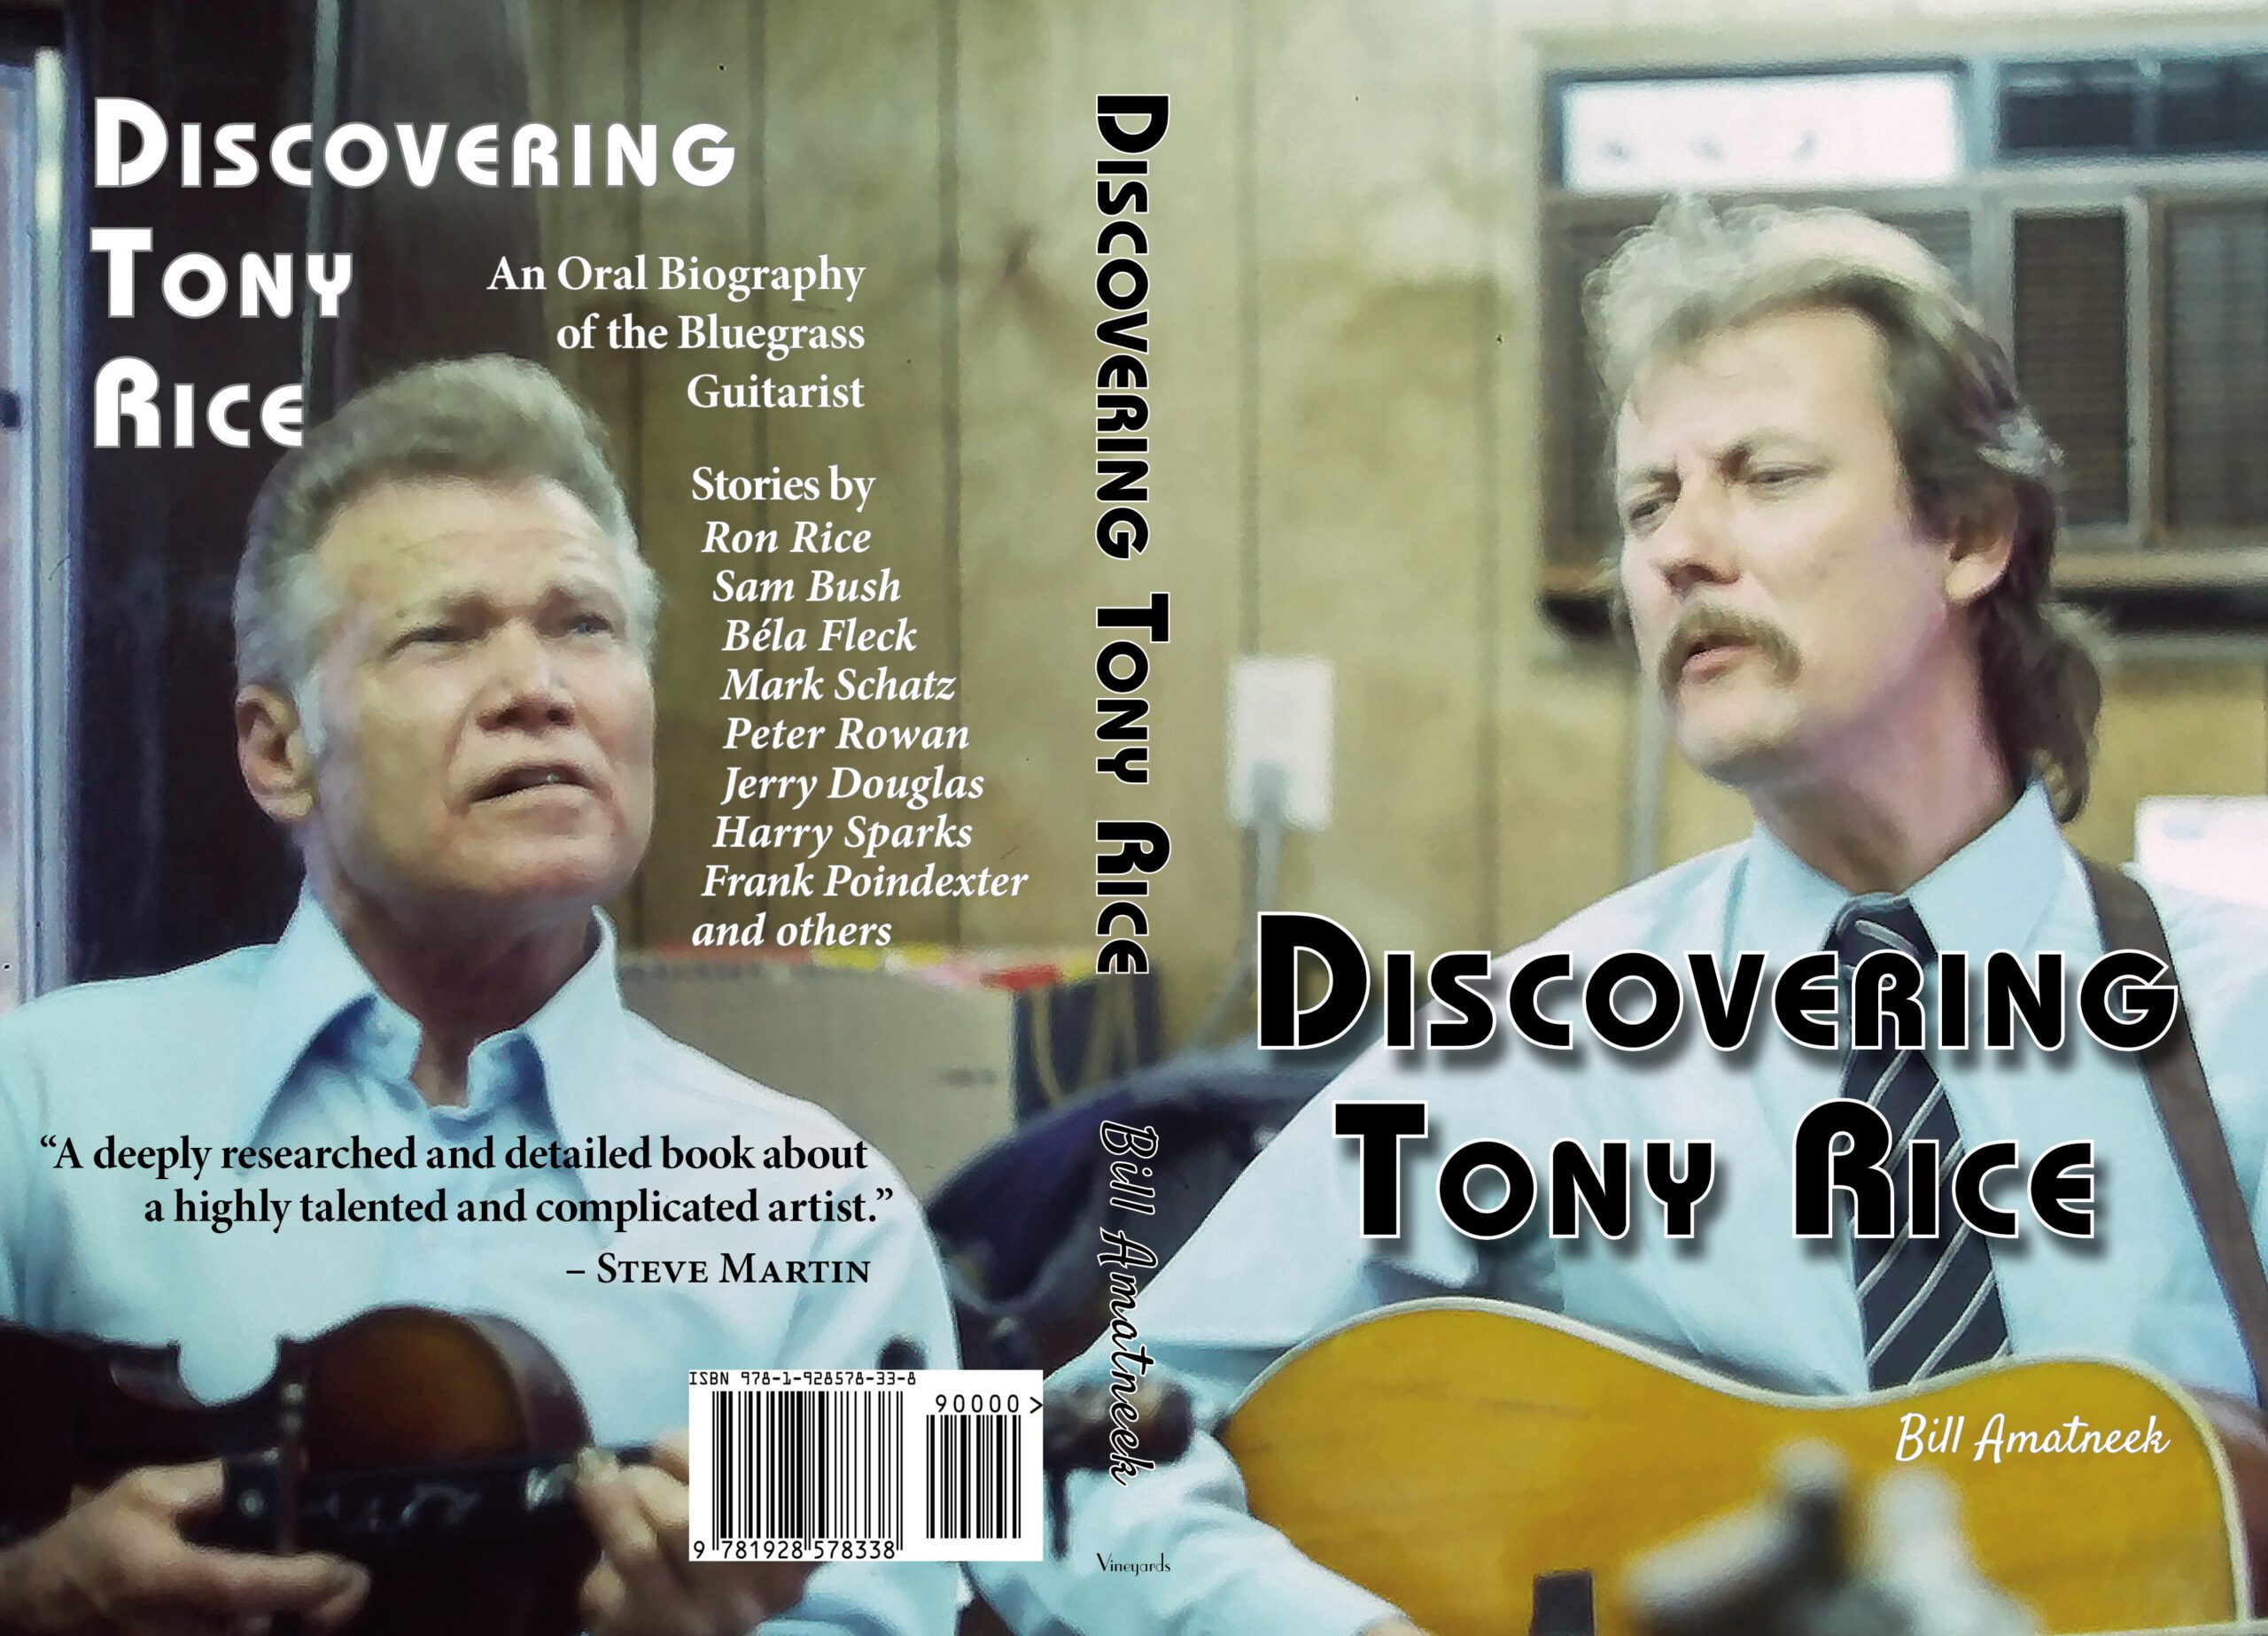 "Discovering Tony Rice" wrap around cover